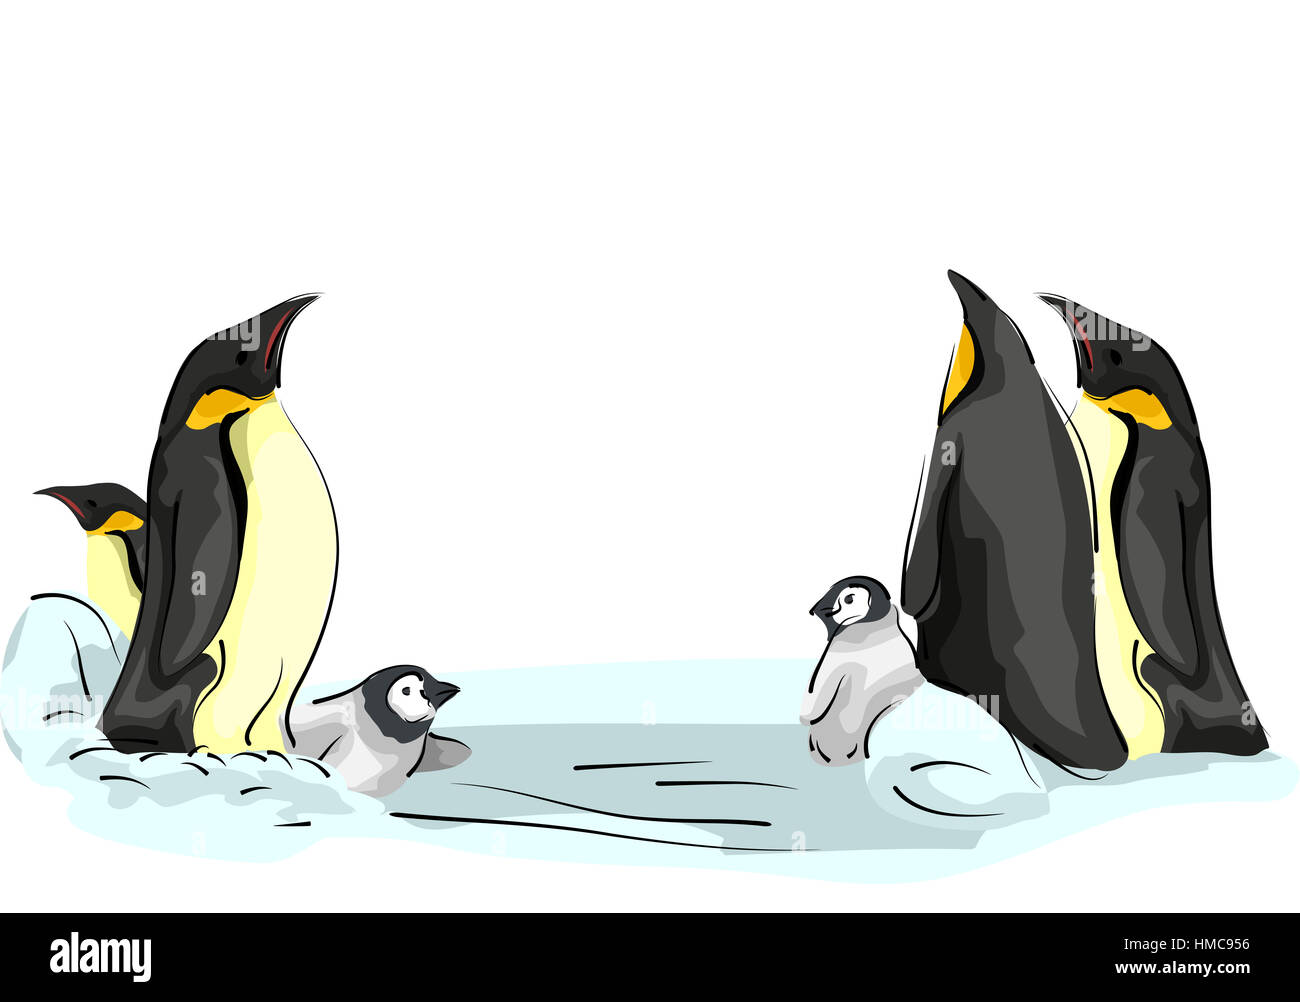 Animal Illustration of a Family of Emperor Penguins Playing on an Ice Sheet Stock Photo